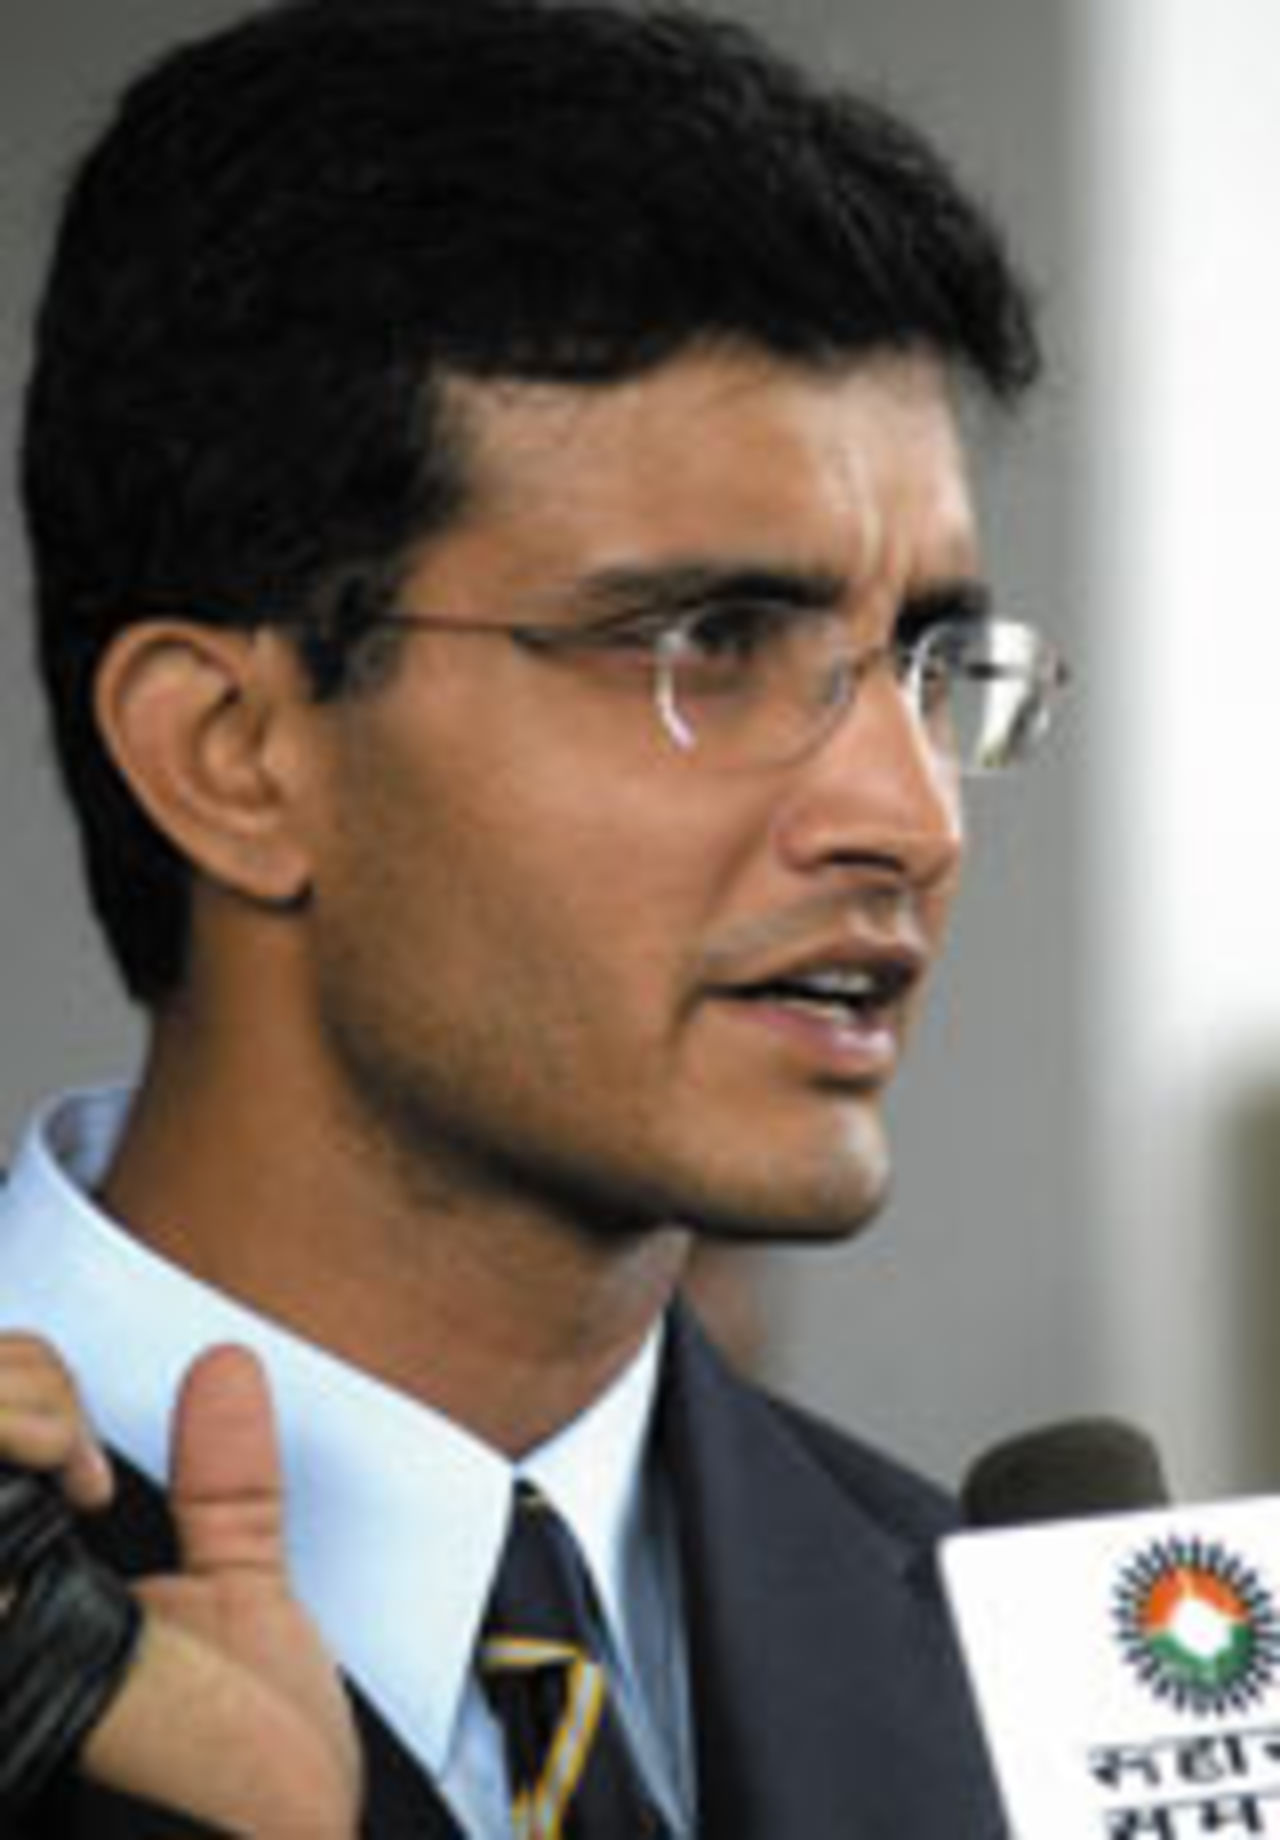 Sourav Ganguly speaking to the media before the team's departure to Australia, November 21, 2003